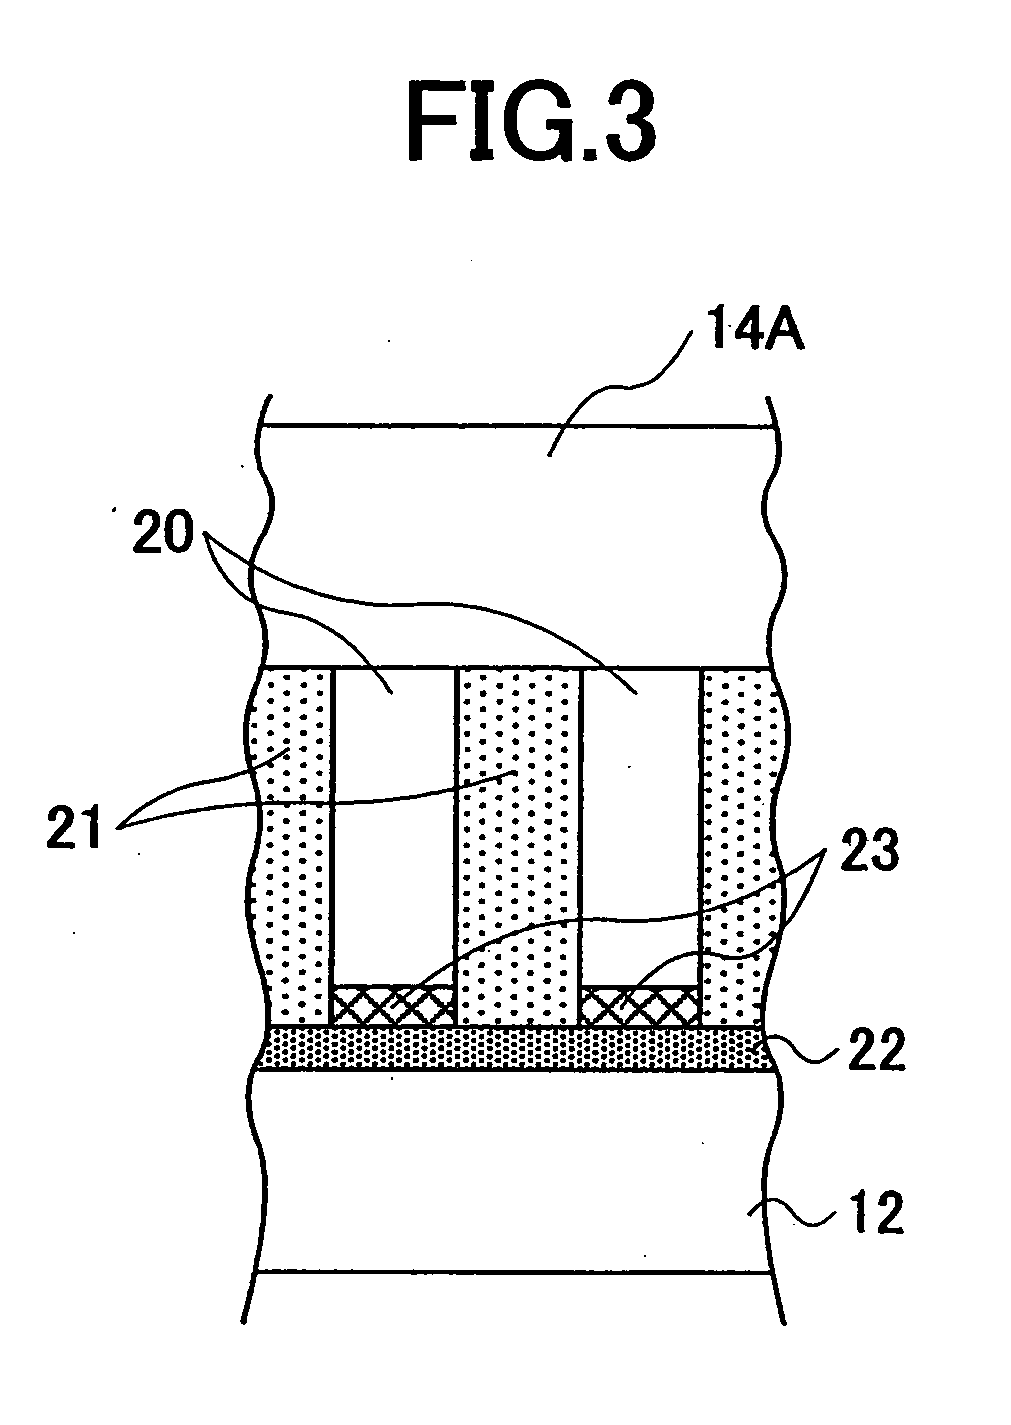 Semiconductor device with improved heat dissipation, and a method of making semiconductor device